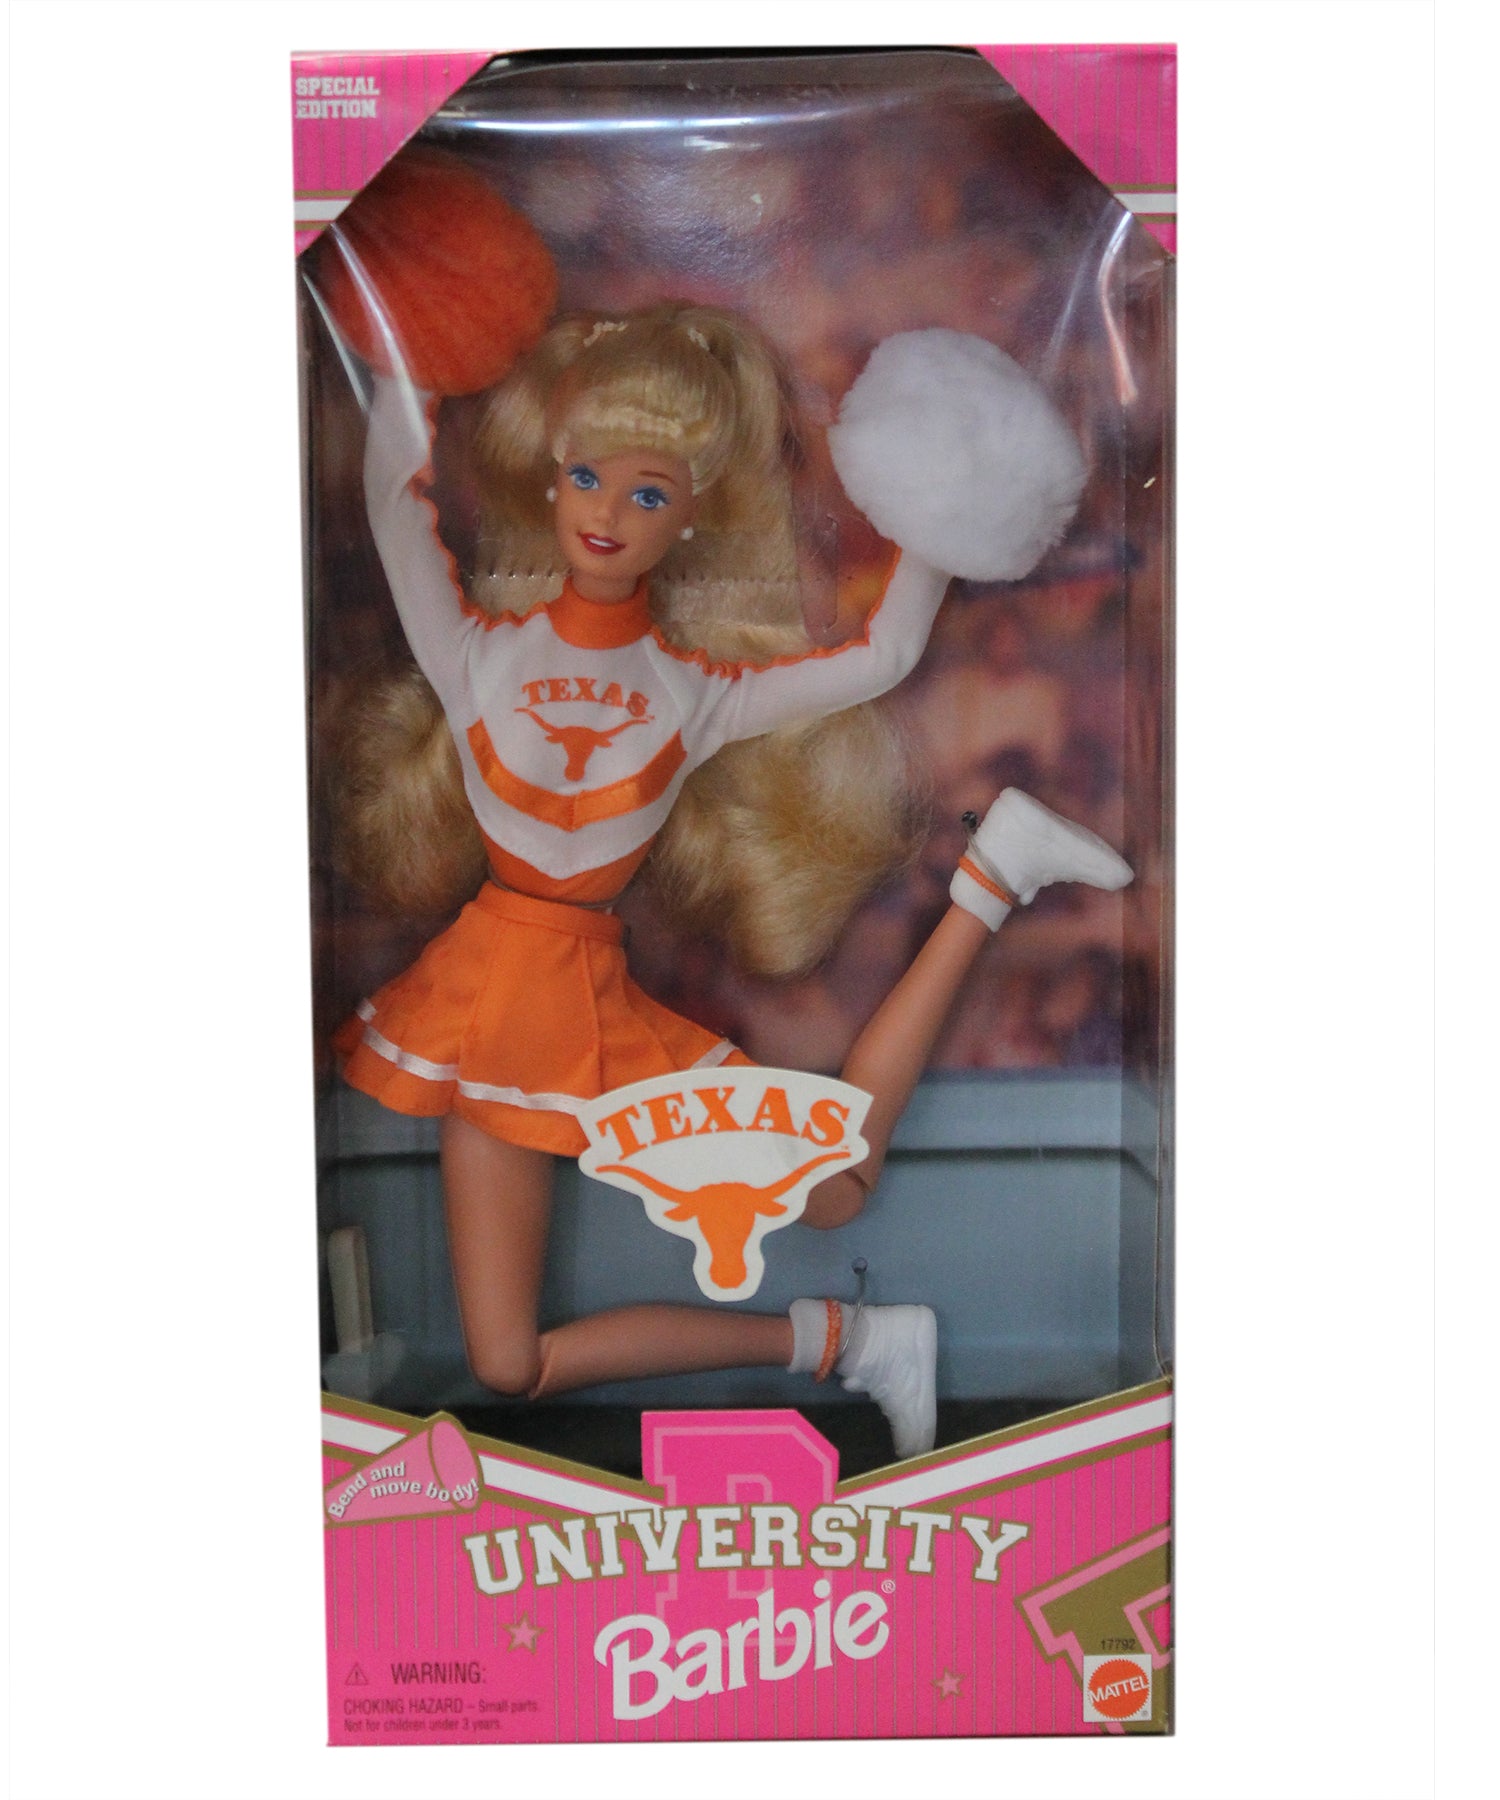 Barbie Special Edition University バービー N.C. State 20127